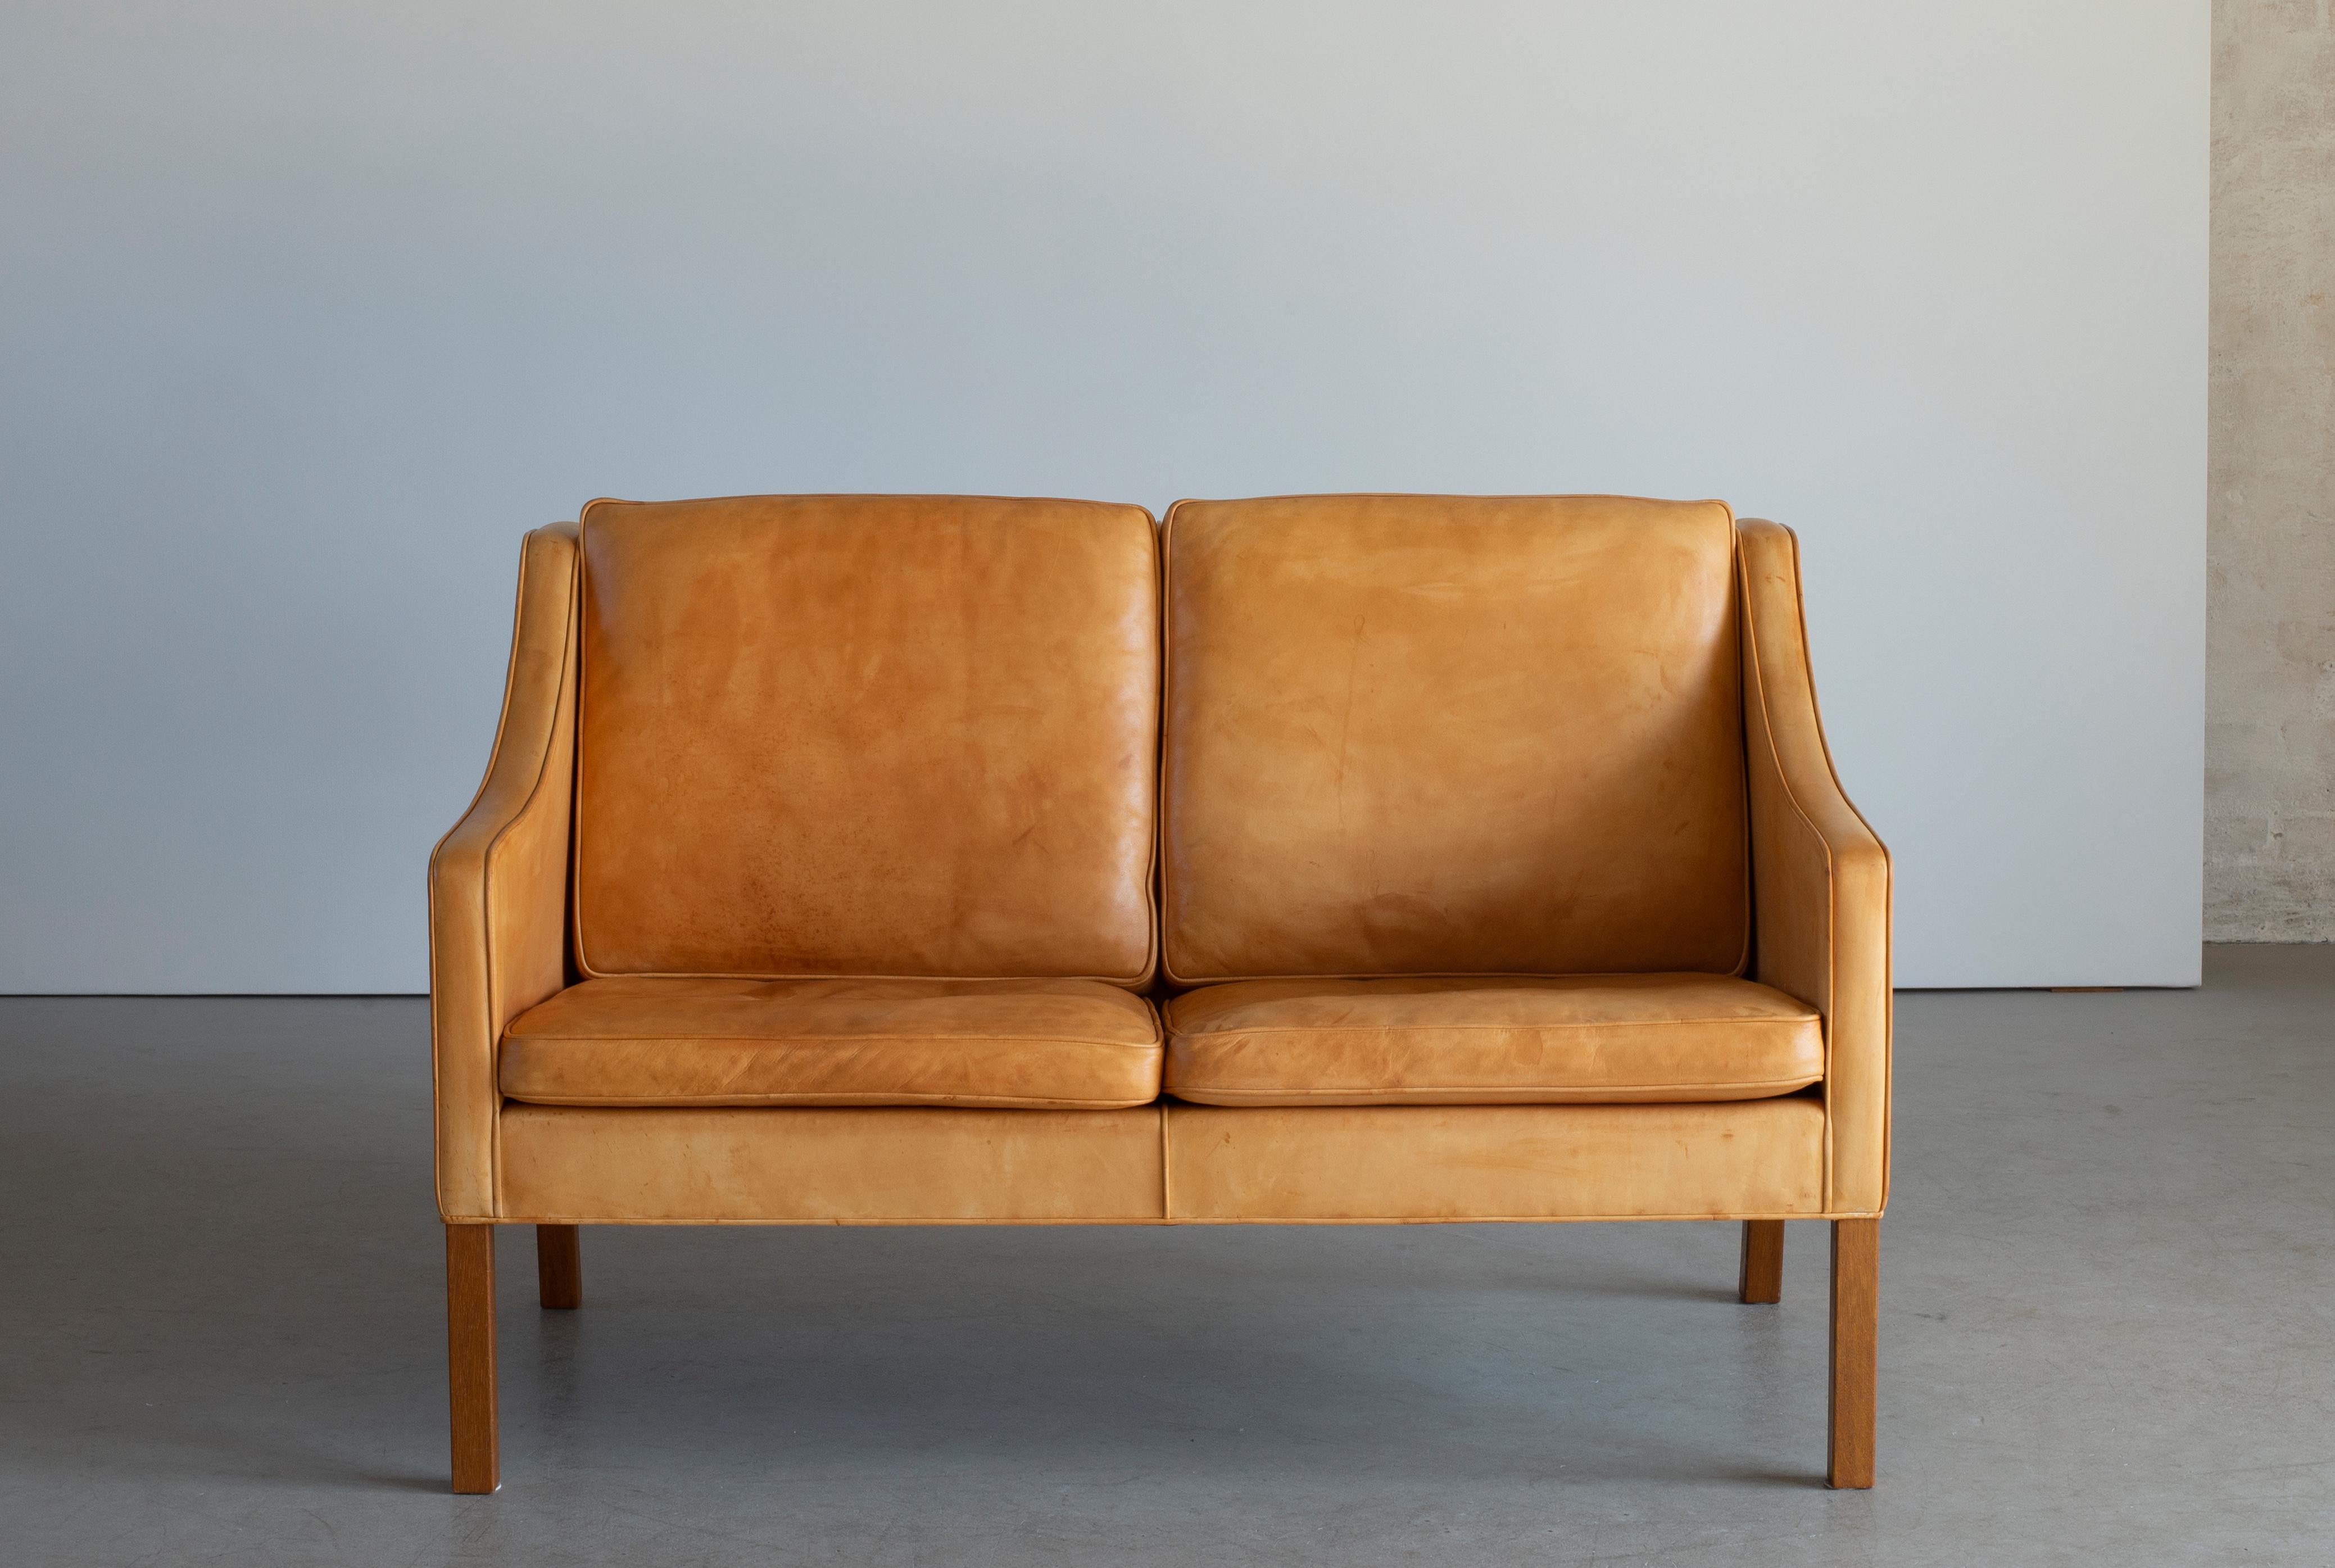 Freestanding two seater sofa with legs of oak. Sides, back and loose cushions upholstered with natural tanned ox-hide. Model 2208. Manufactured and marked by Fredericia Stolefabrik.